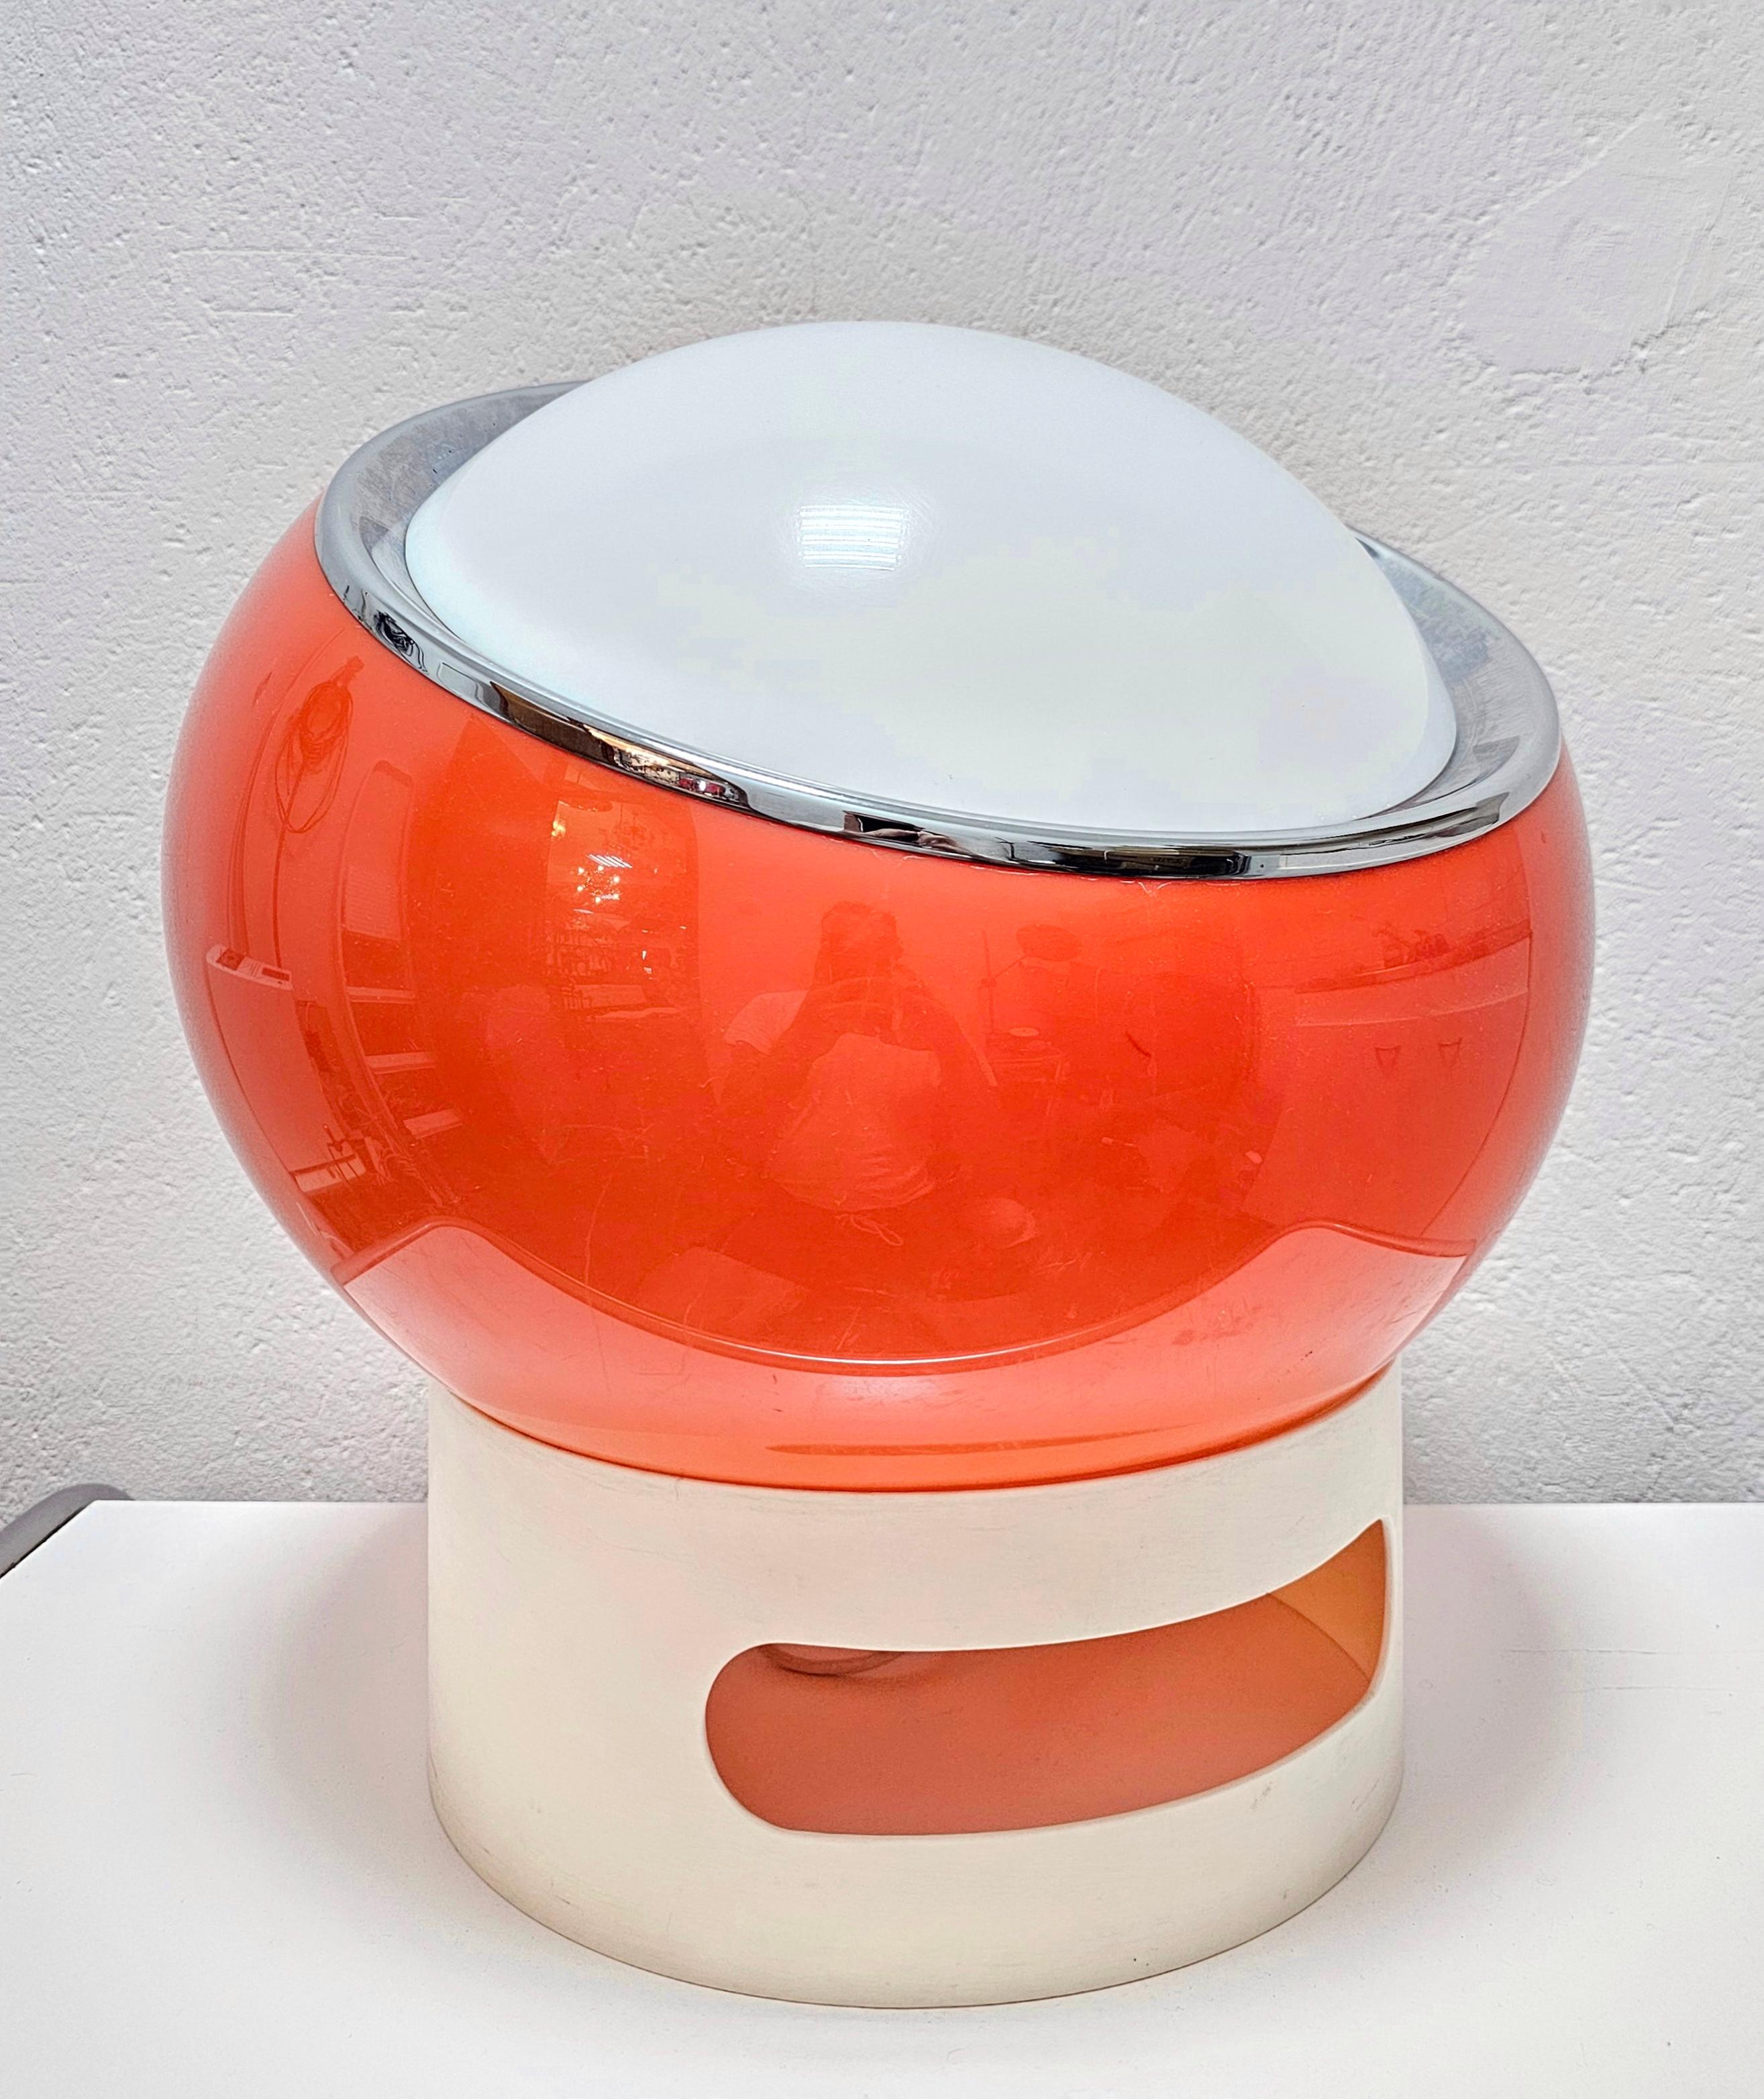 This listing features a very rare Clan floor lamp by Guzzini, designed by Studio 6G for Meblo. It was manufactured in 1970s and it features a large acrylic shade in orange, with the plastic stand. 

Very good vintage condition with barely any sign